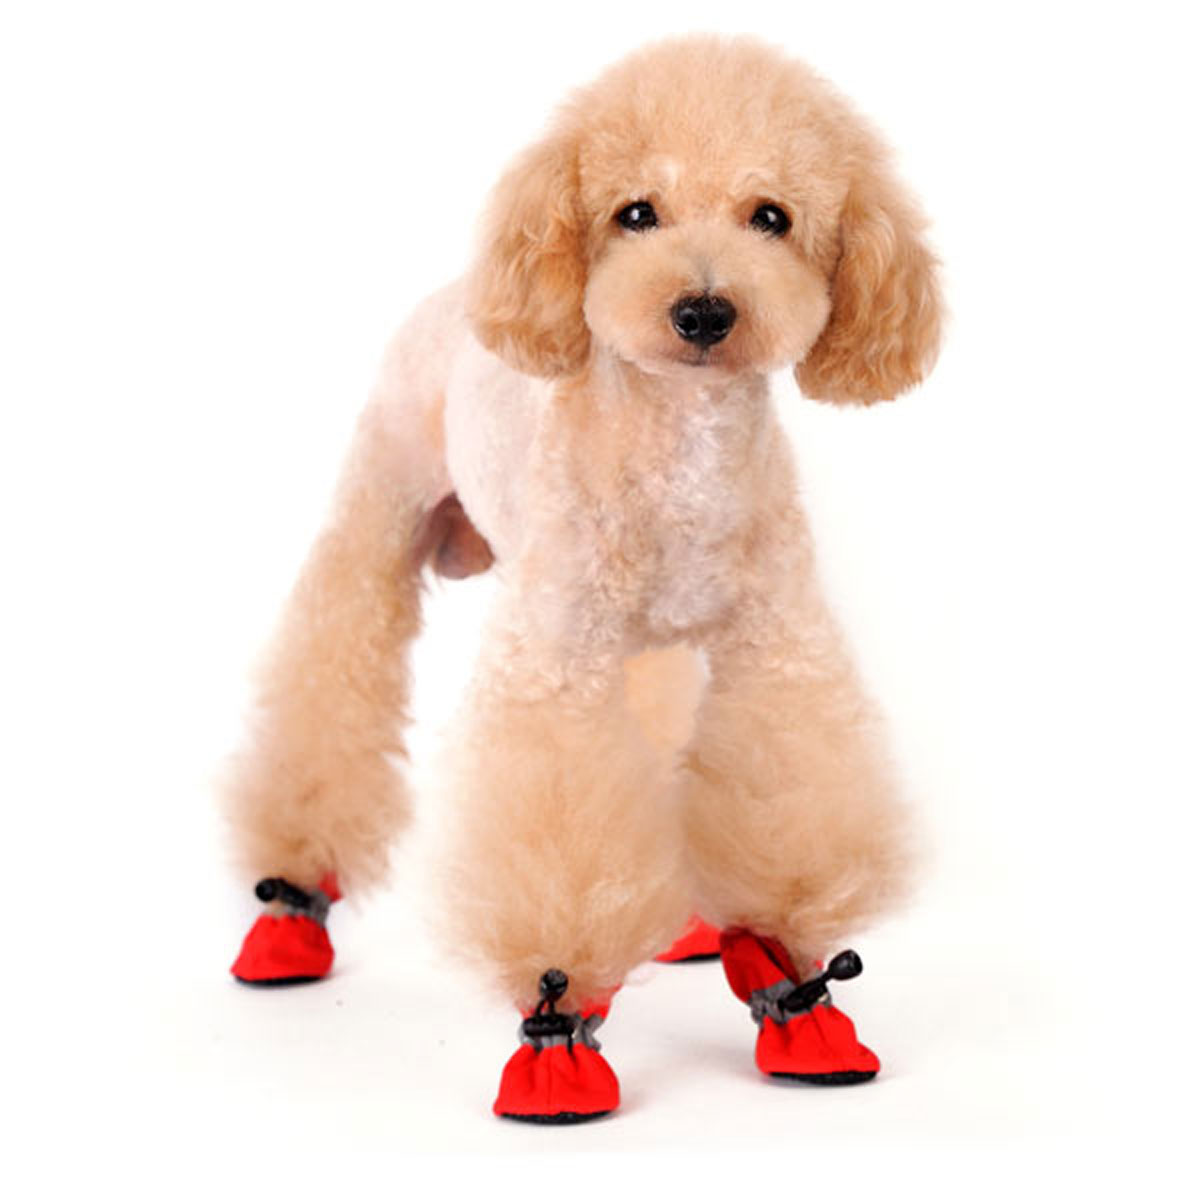 Slip-On Paws Dog Booties by Dogo - Solid Red